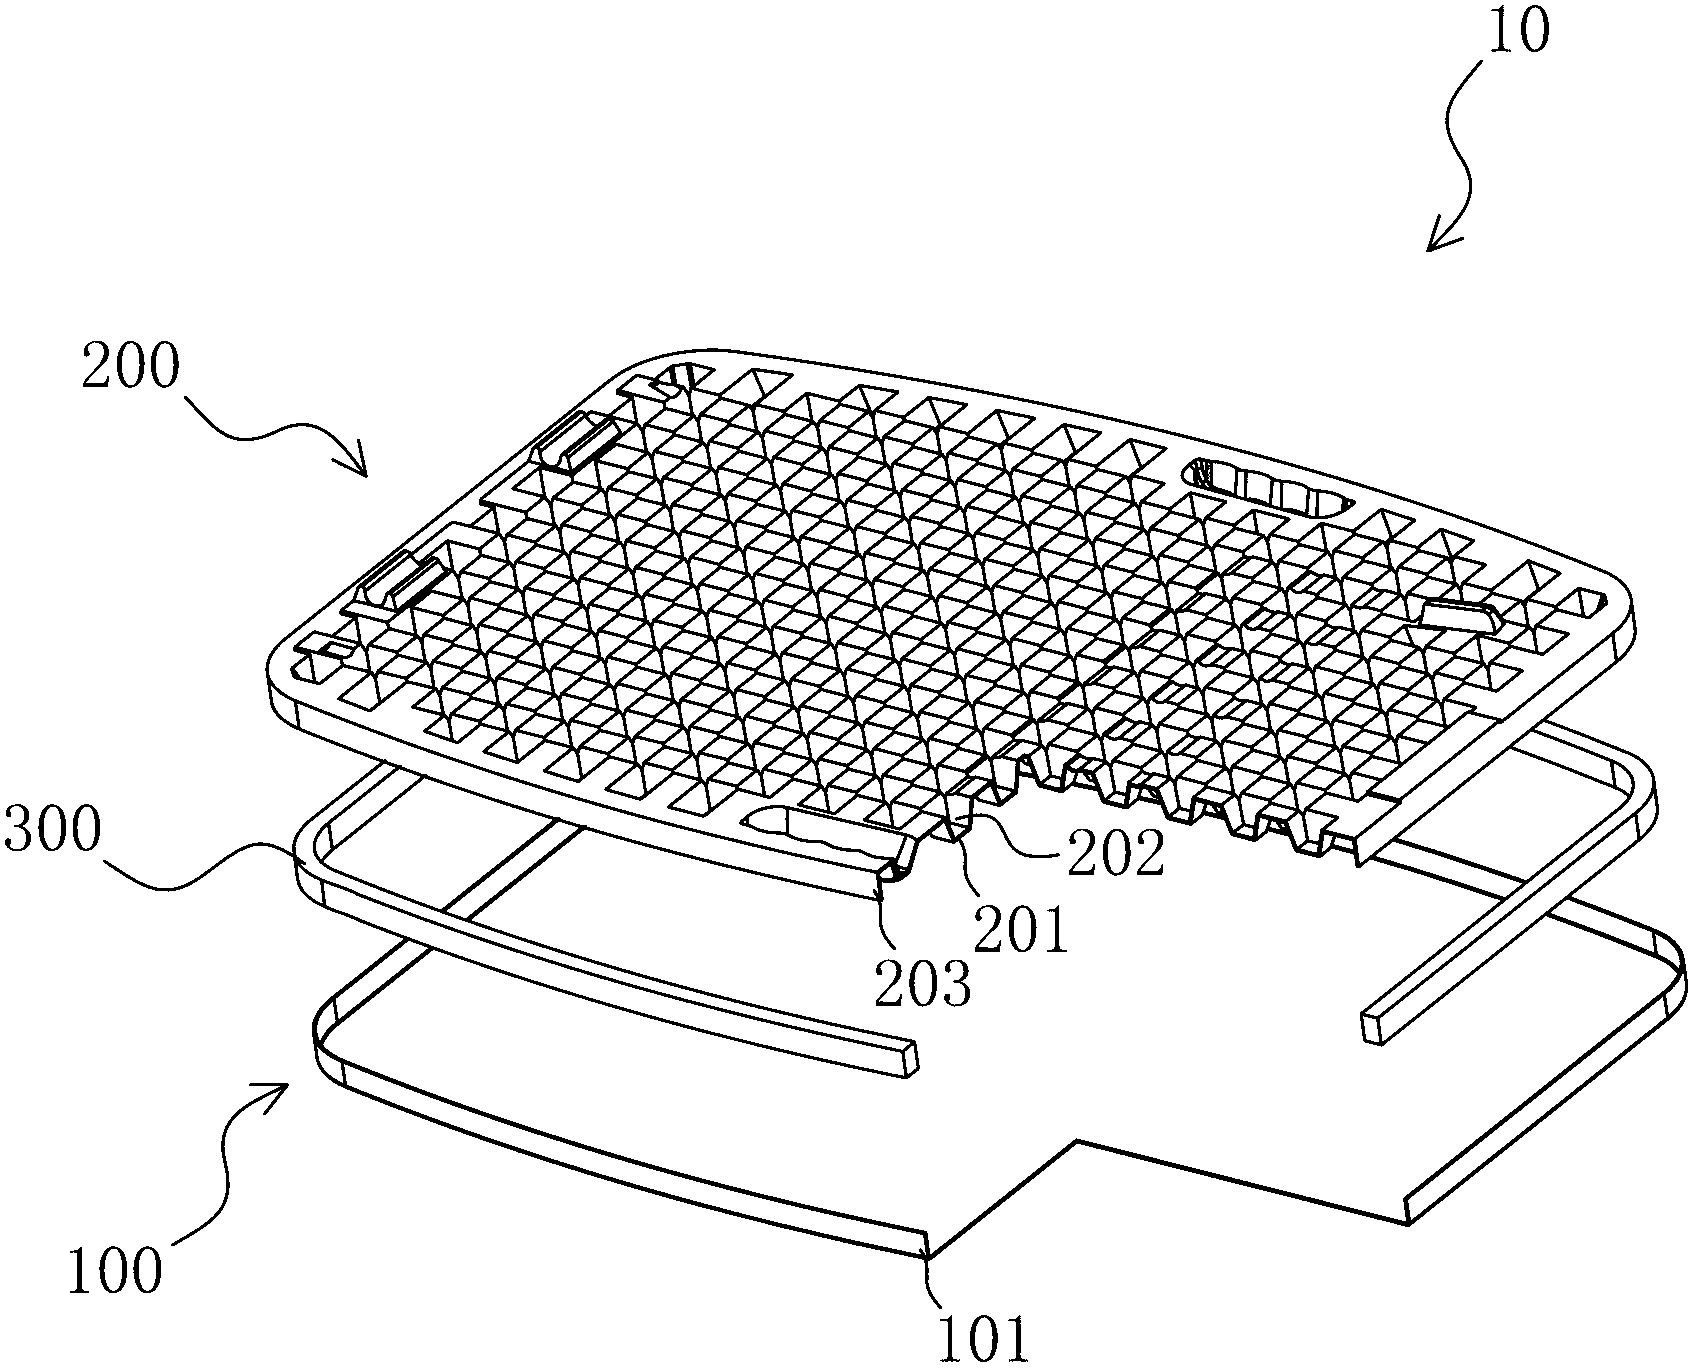 Structure of composite table top